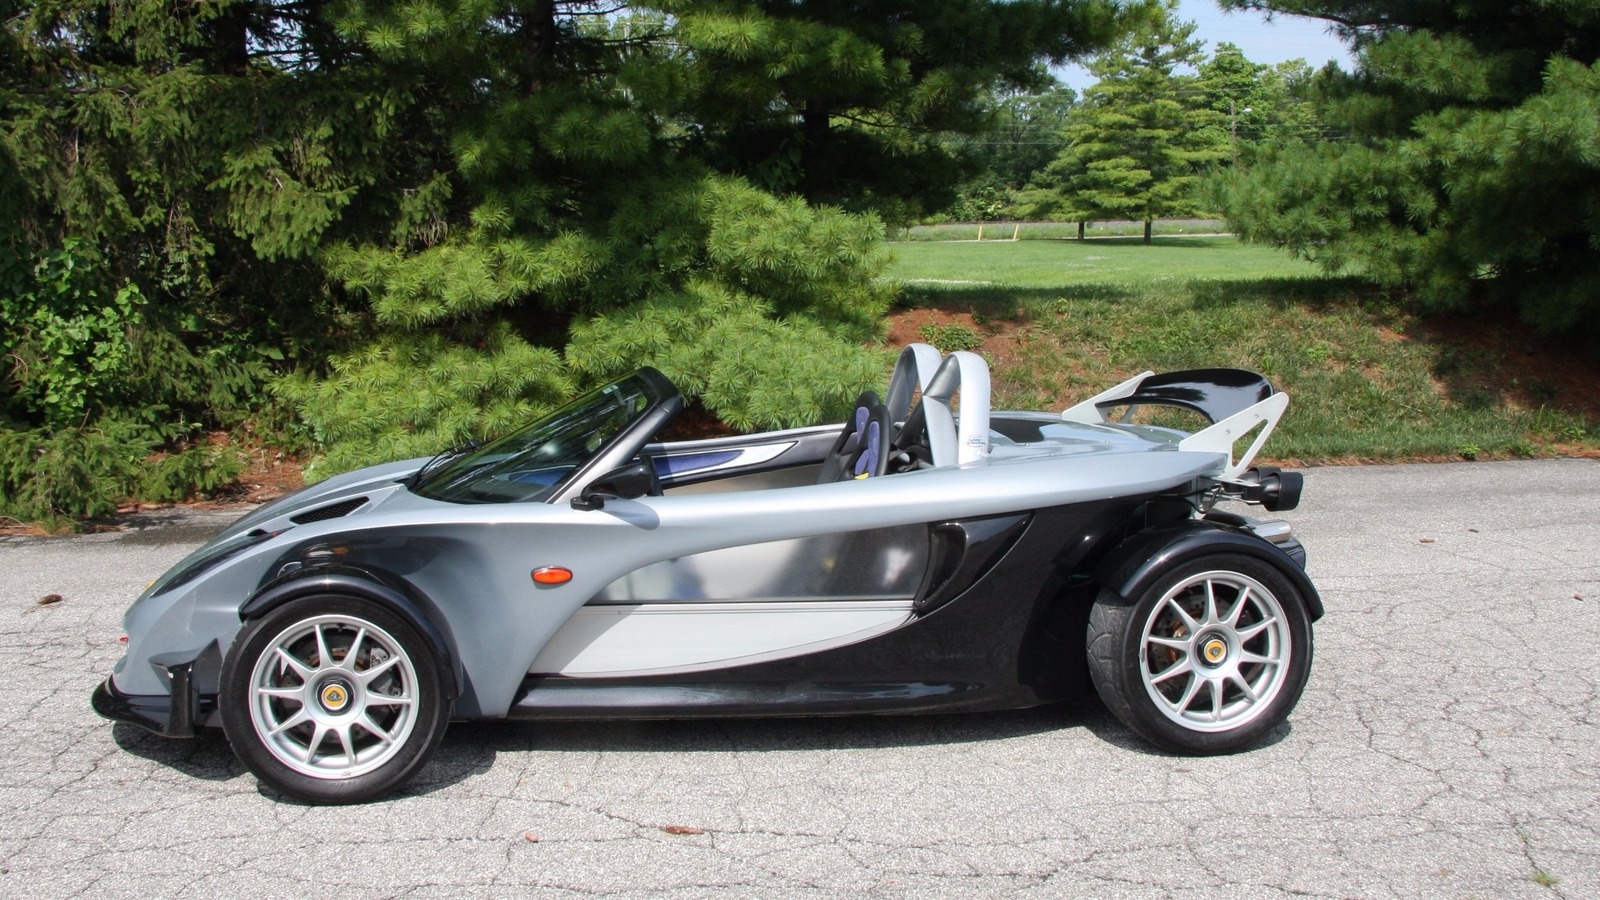 It's No Secret Why The 2012 Lotus 340R Was Banned In The US